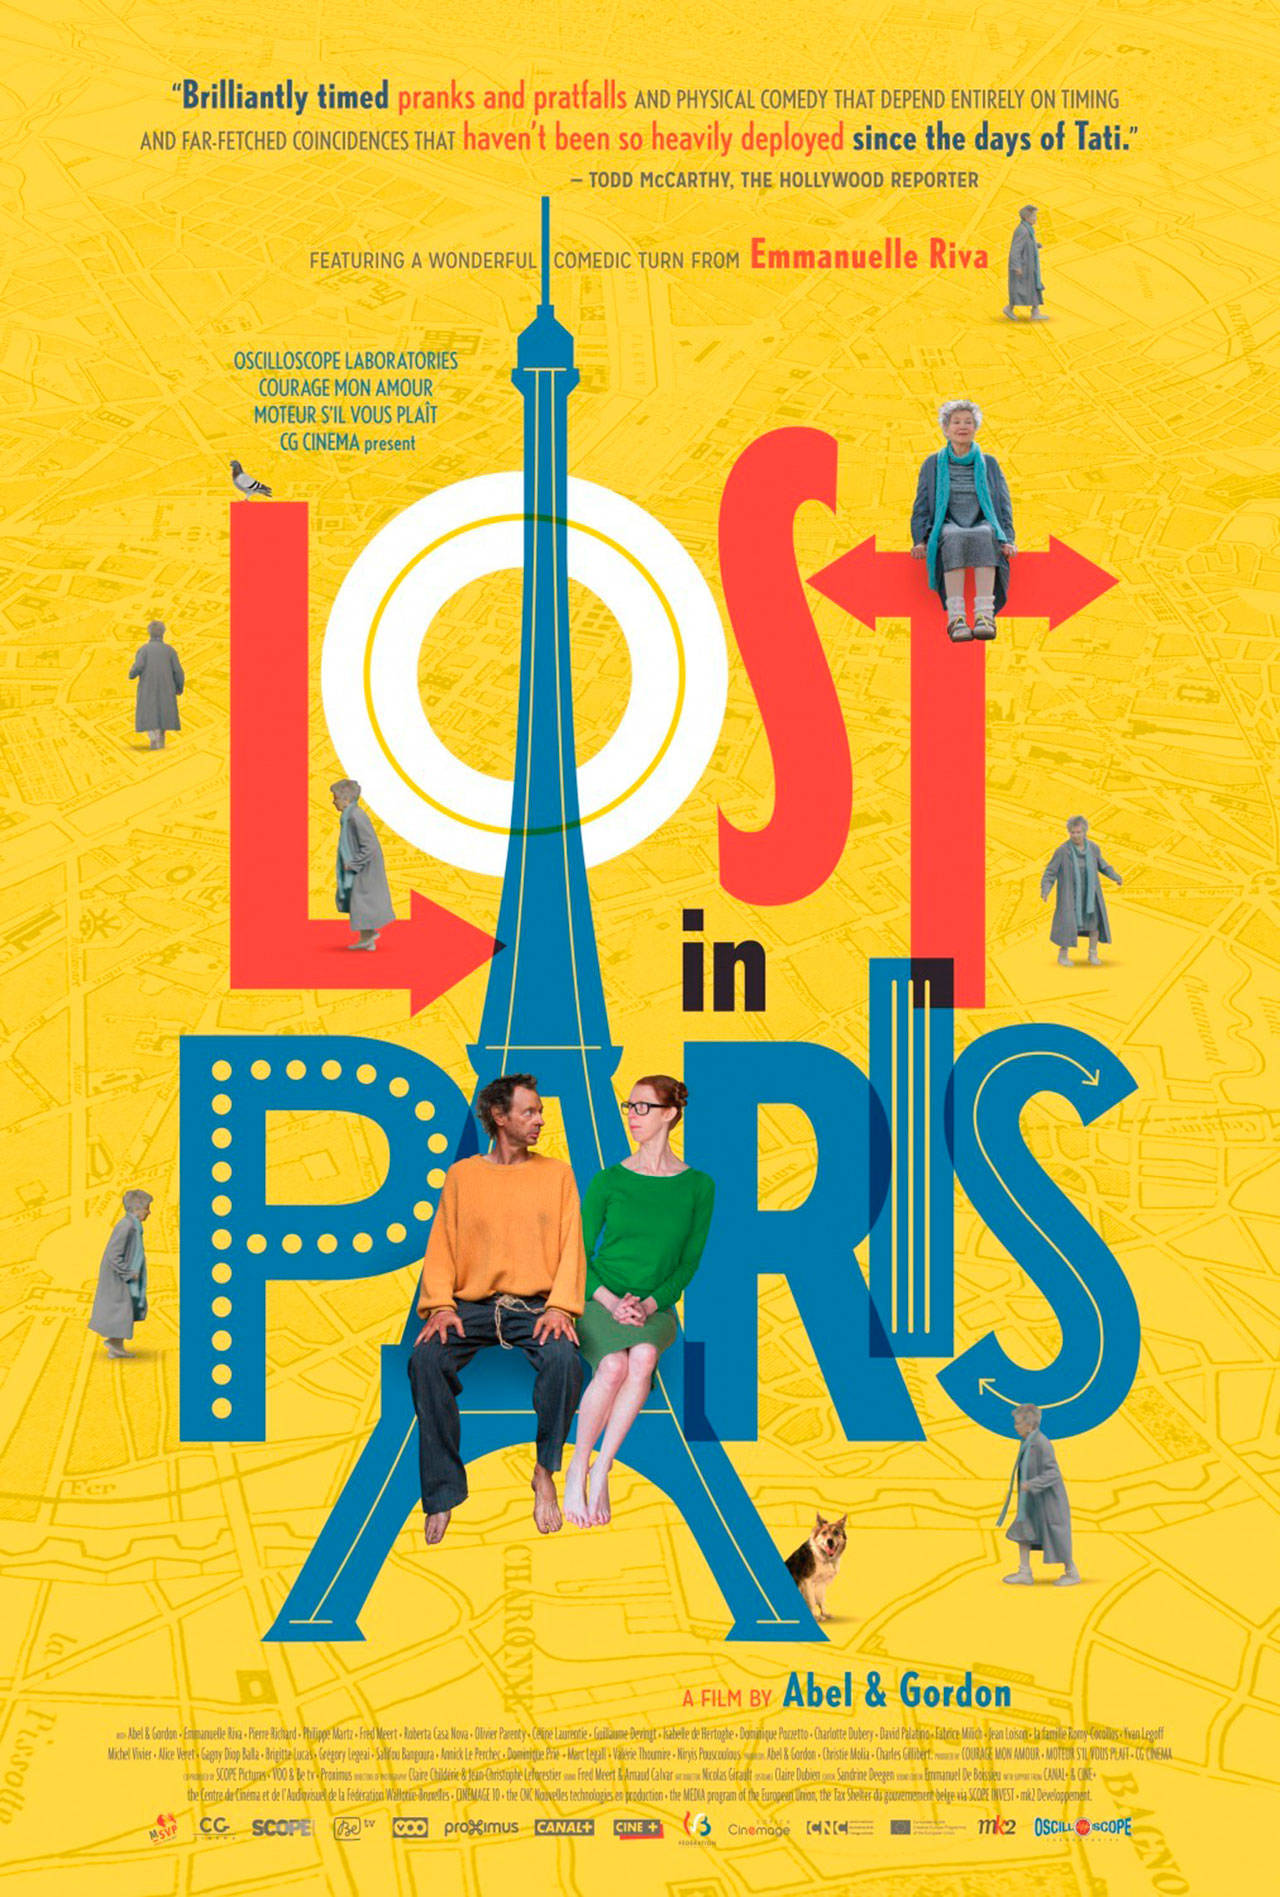 Image courtesy of the Bainbridge Island Museum of Art | The Bainbridge Island Museum of Art’s latest smARTfilm series continues at 7:30 p.m. Tuesday, Feb. 5 with “Lost in Paris” (2017).